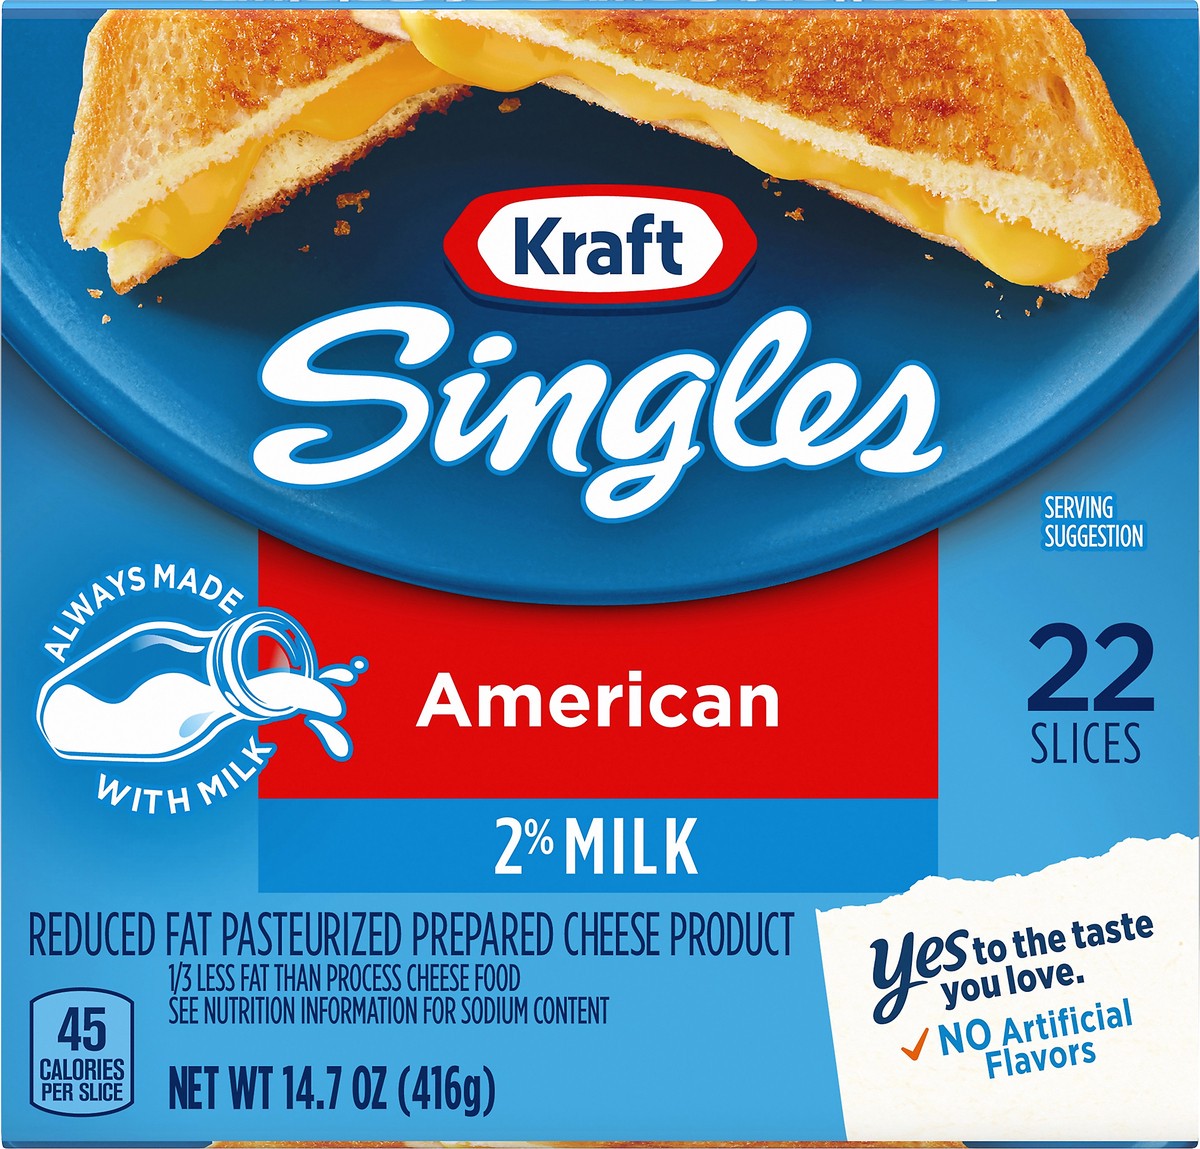 slide 9 of 9, Kraft Singles 2% Pasteurized Prepared Cheese Product American Slices, 22 ct Pack, 22 ct